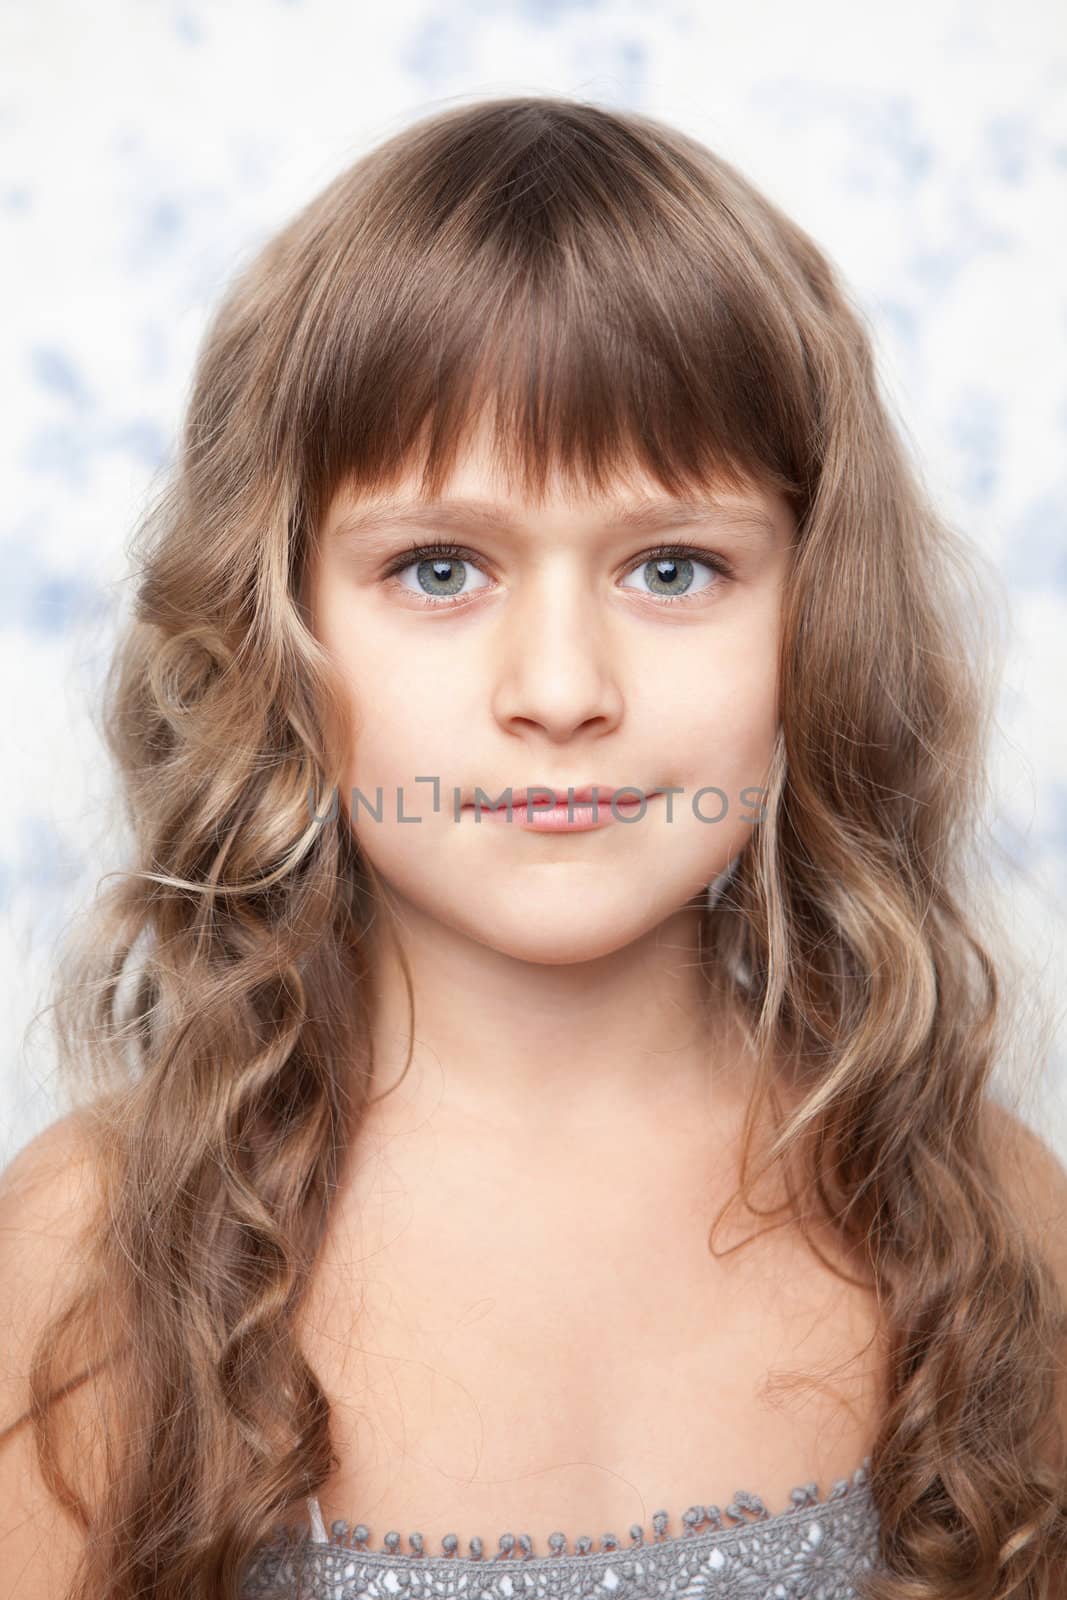 Portrait of sincere cheerful tender young blond girl child with grey eyes and wavy long hair looking at camera